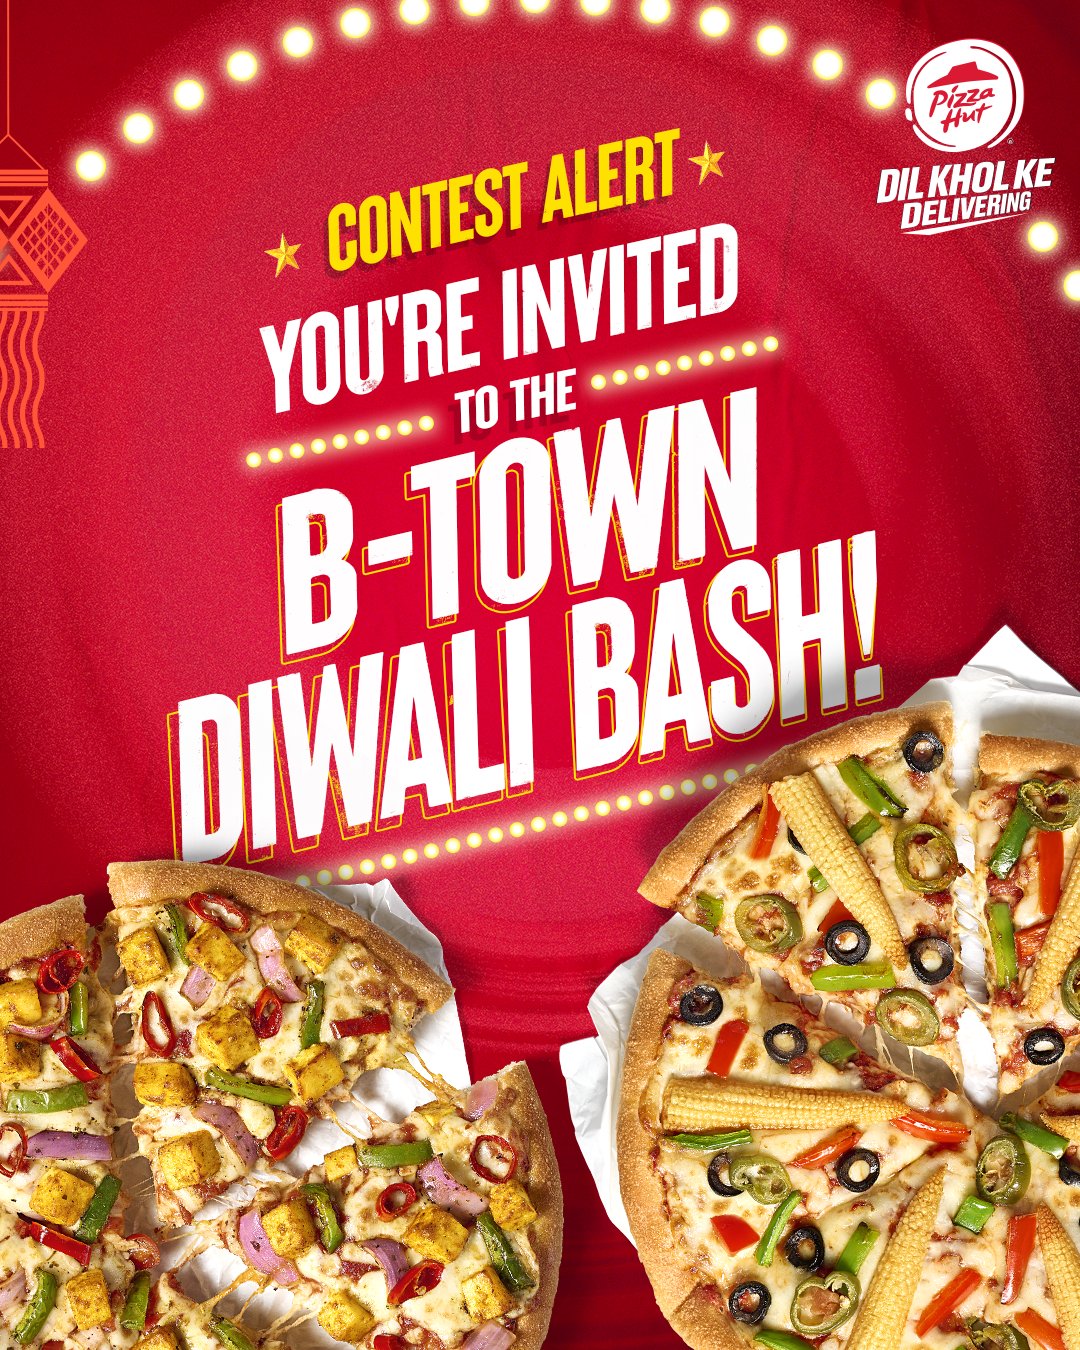 Pizza Hut India Hey Hut Lovers It S Diwali Time And You Re Invited To Some Of The Coolest Parties Of Bollywood Guess The Bollywood Celebs That Are Throwing The Bash Amp